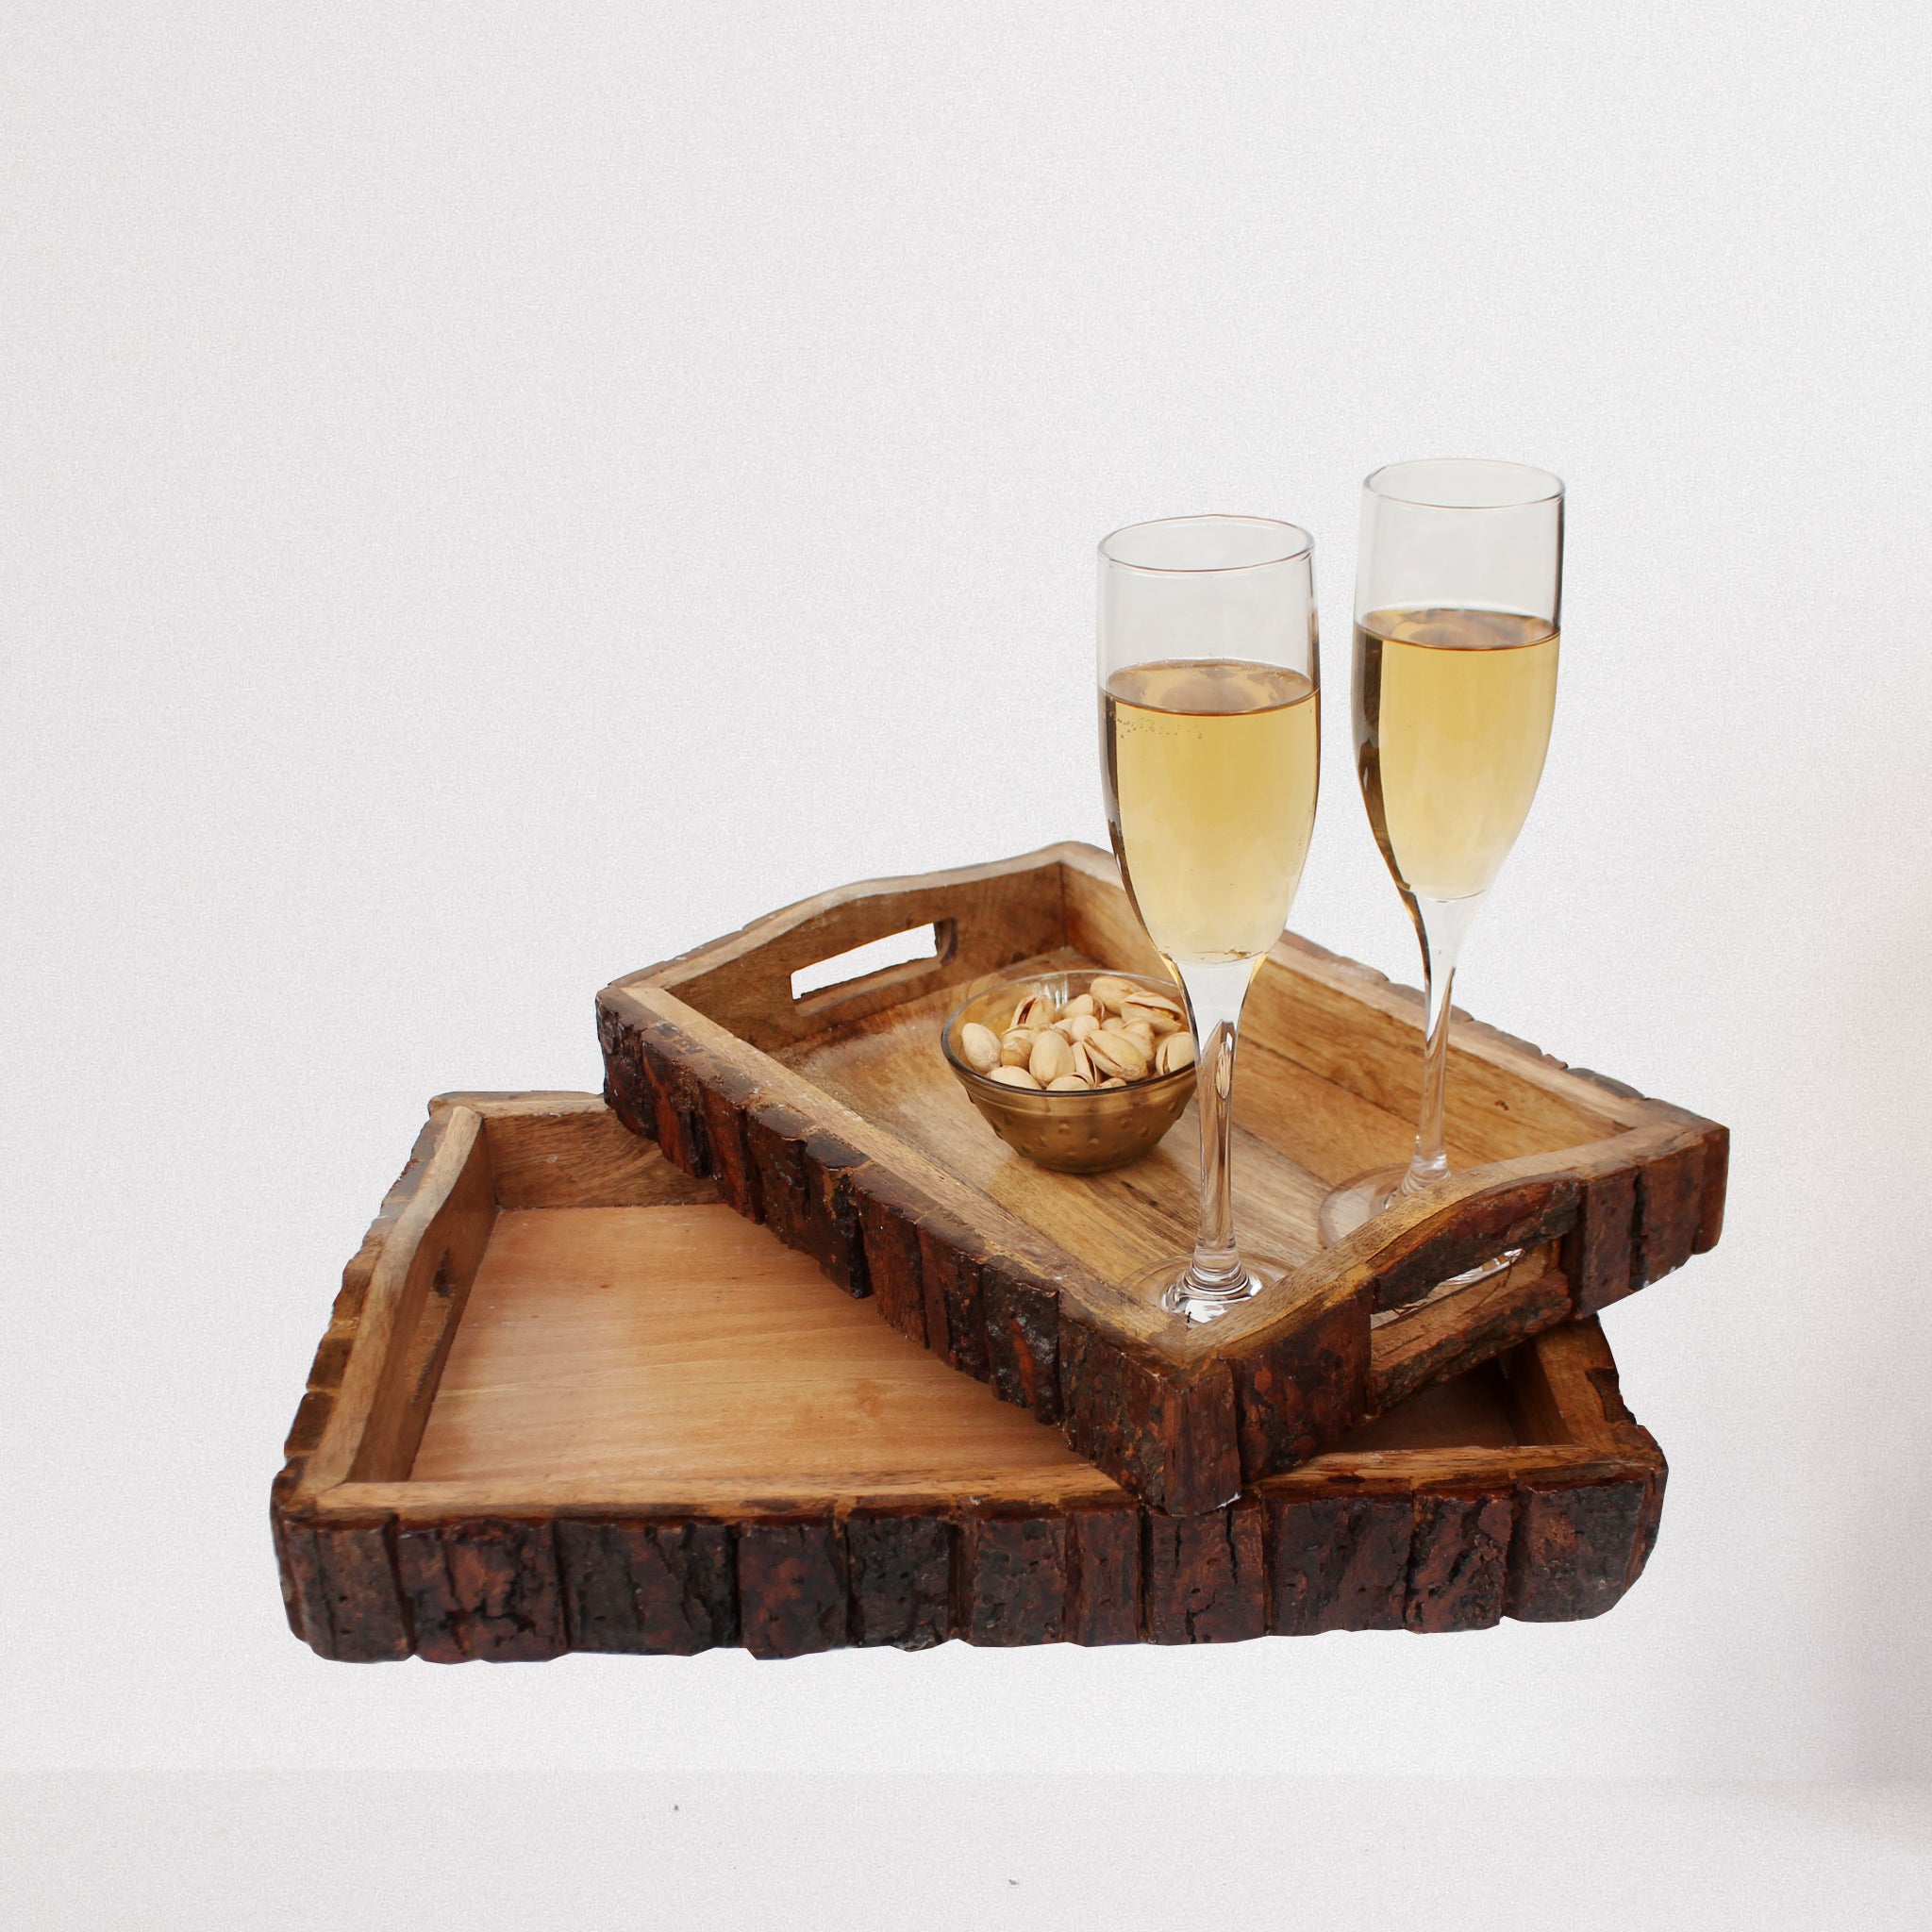 Wooden Serving Trays, Multipurpose Tray for Kitchen or Tea Table, Brown, Set of 2 // Small Size : 12.5"x8.5"x2" // Large Size : 15"x10.5"x2"